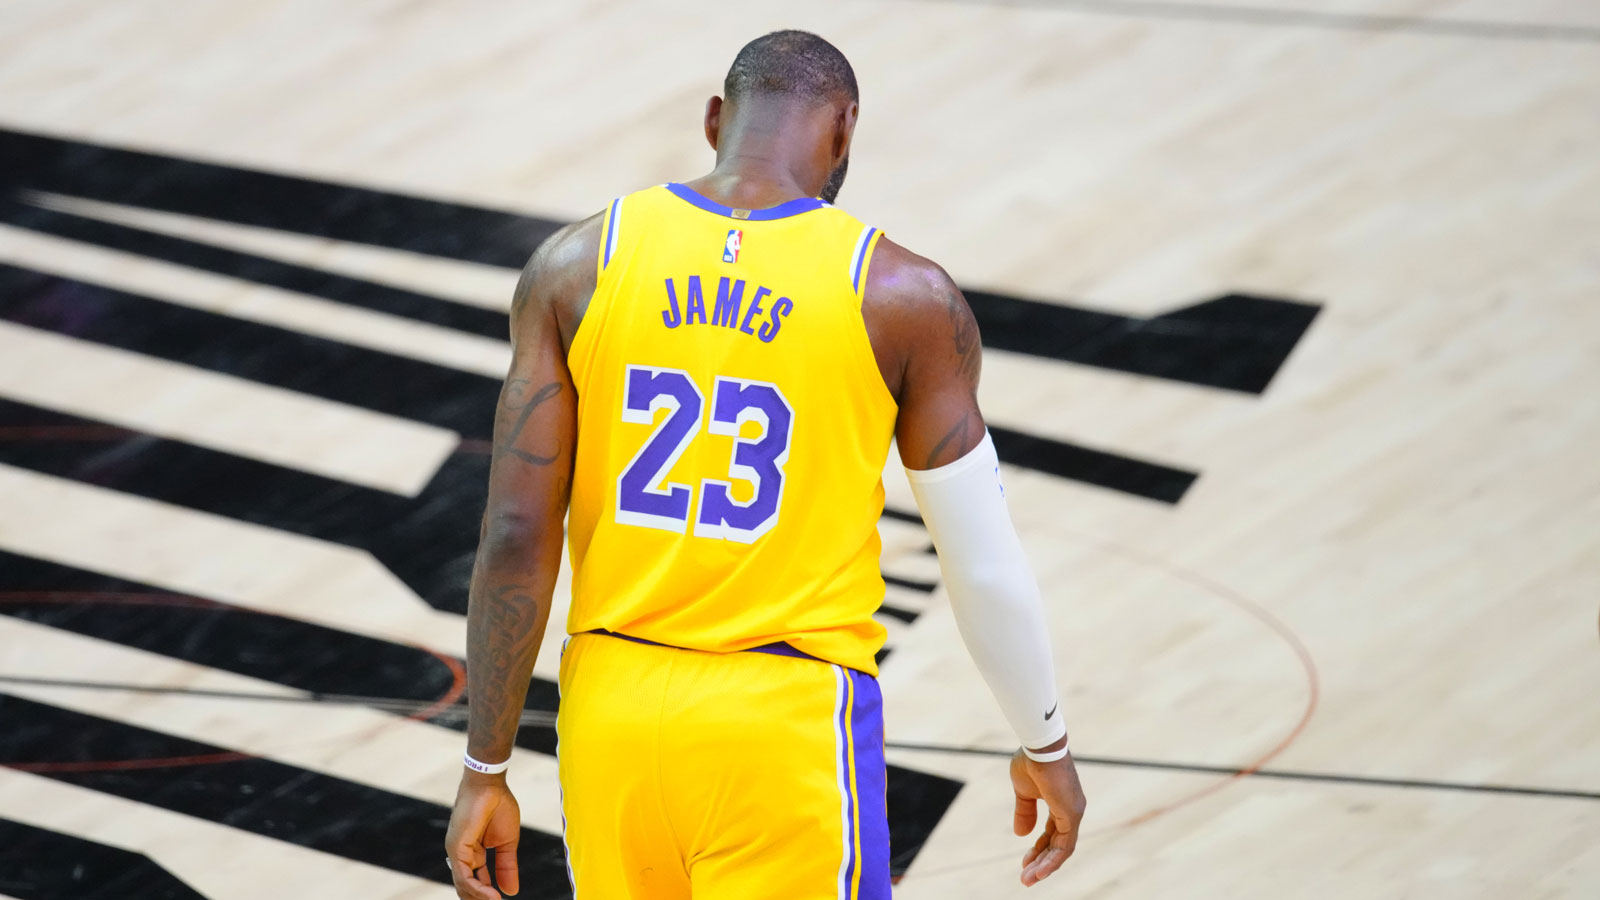 Report: LeBron James to Switch Jersey Numbers After 'Space Jam: A